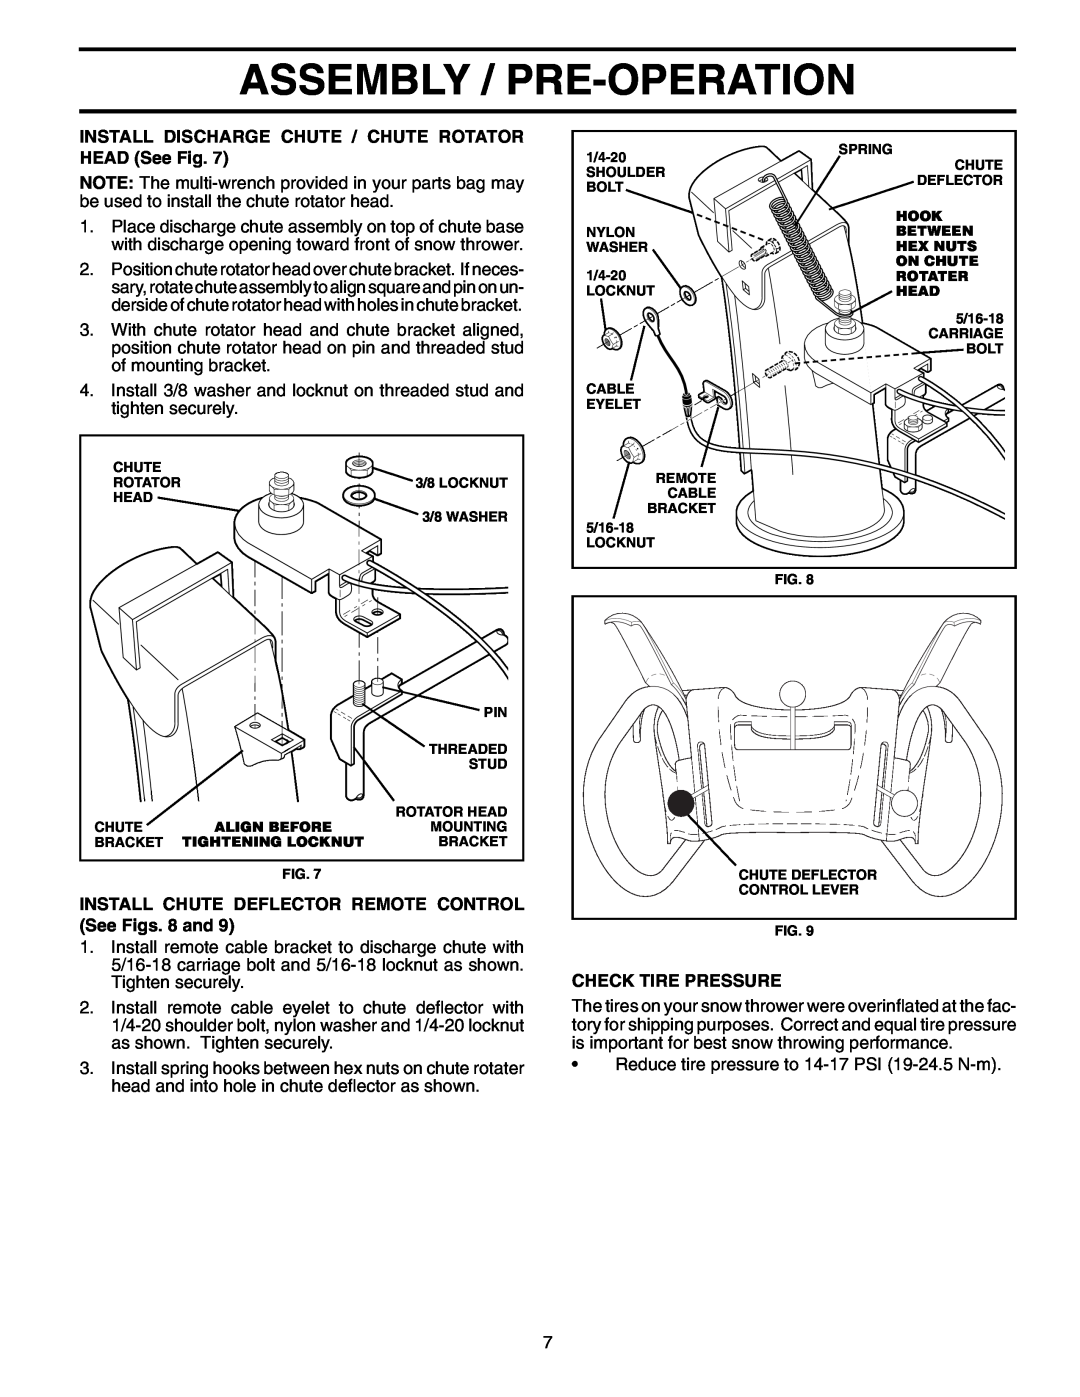 Poulan 406281 Assembly / Pre-Operation, INSTALL DISCHARGE CHUTE / CHUTE ROTATOR HEAD See Fig, Check Tire Pressure 